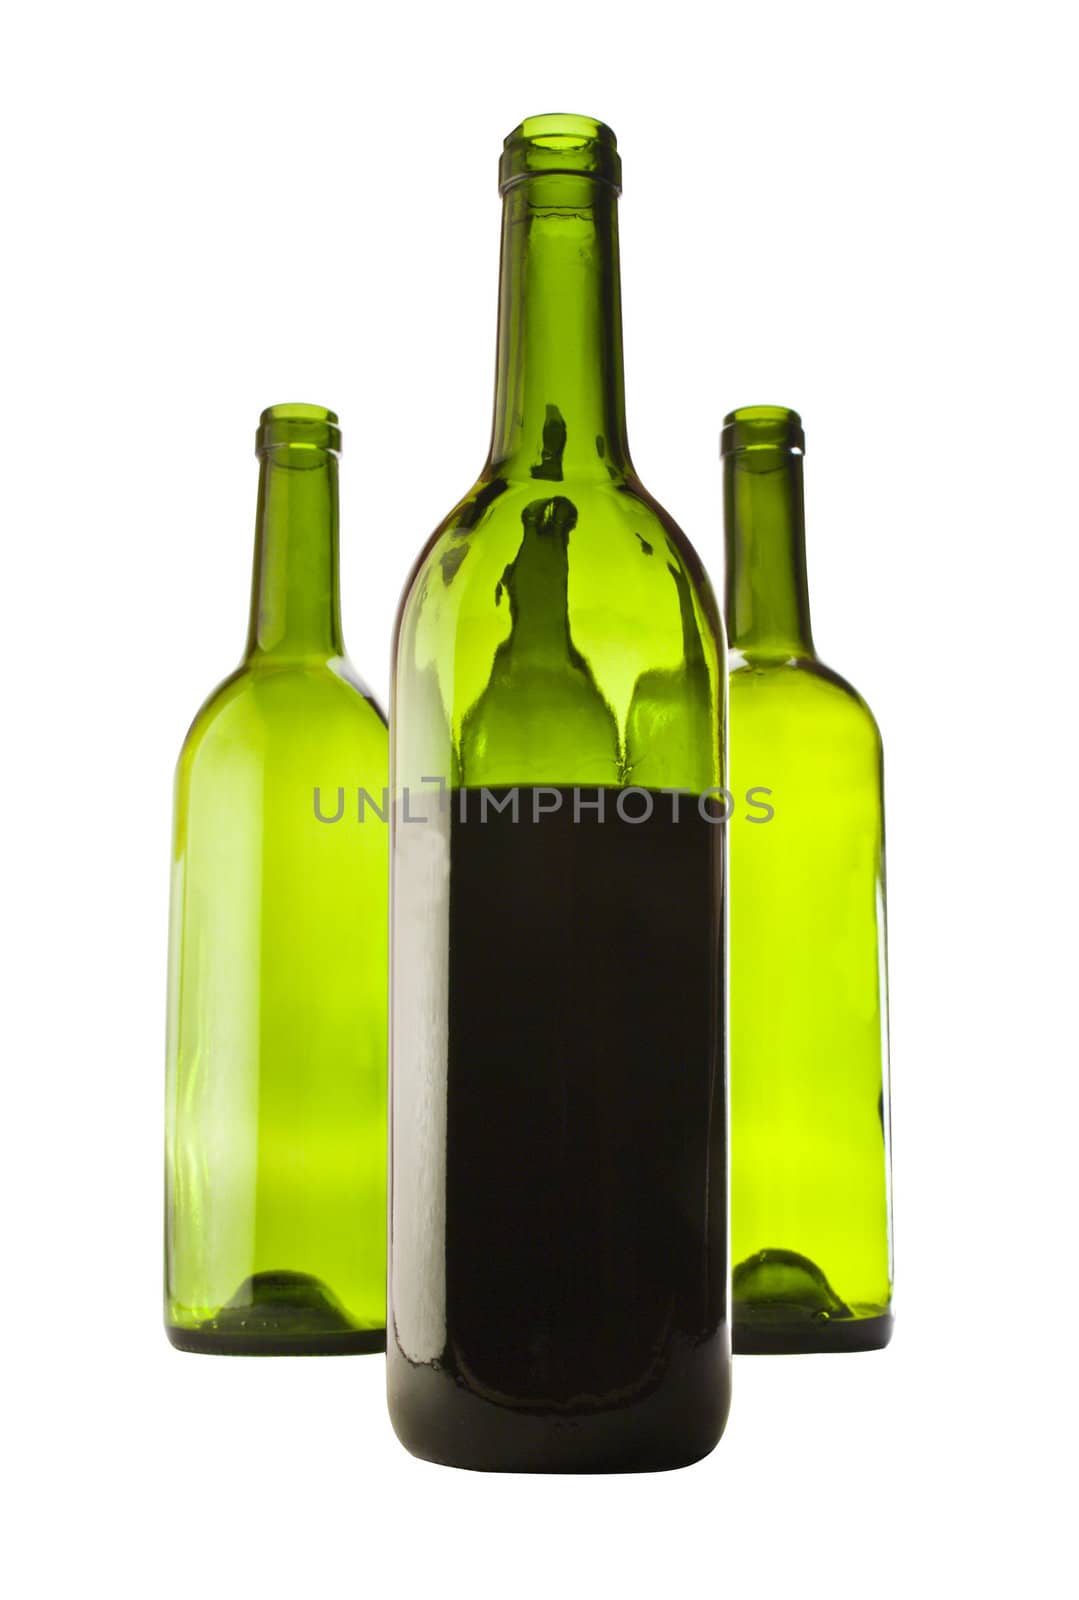 four bottles of wine isolated on a white background